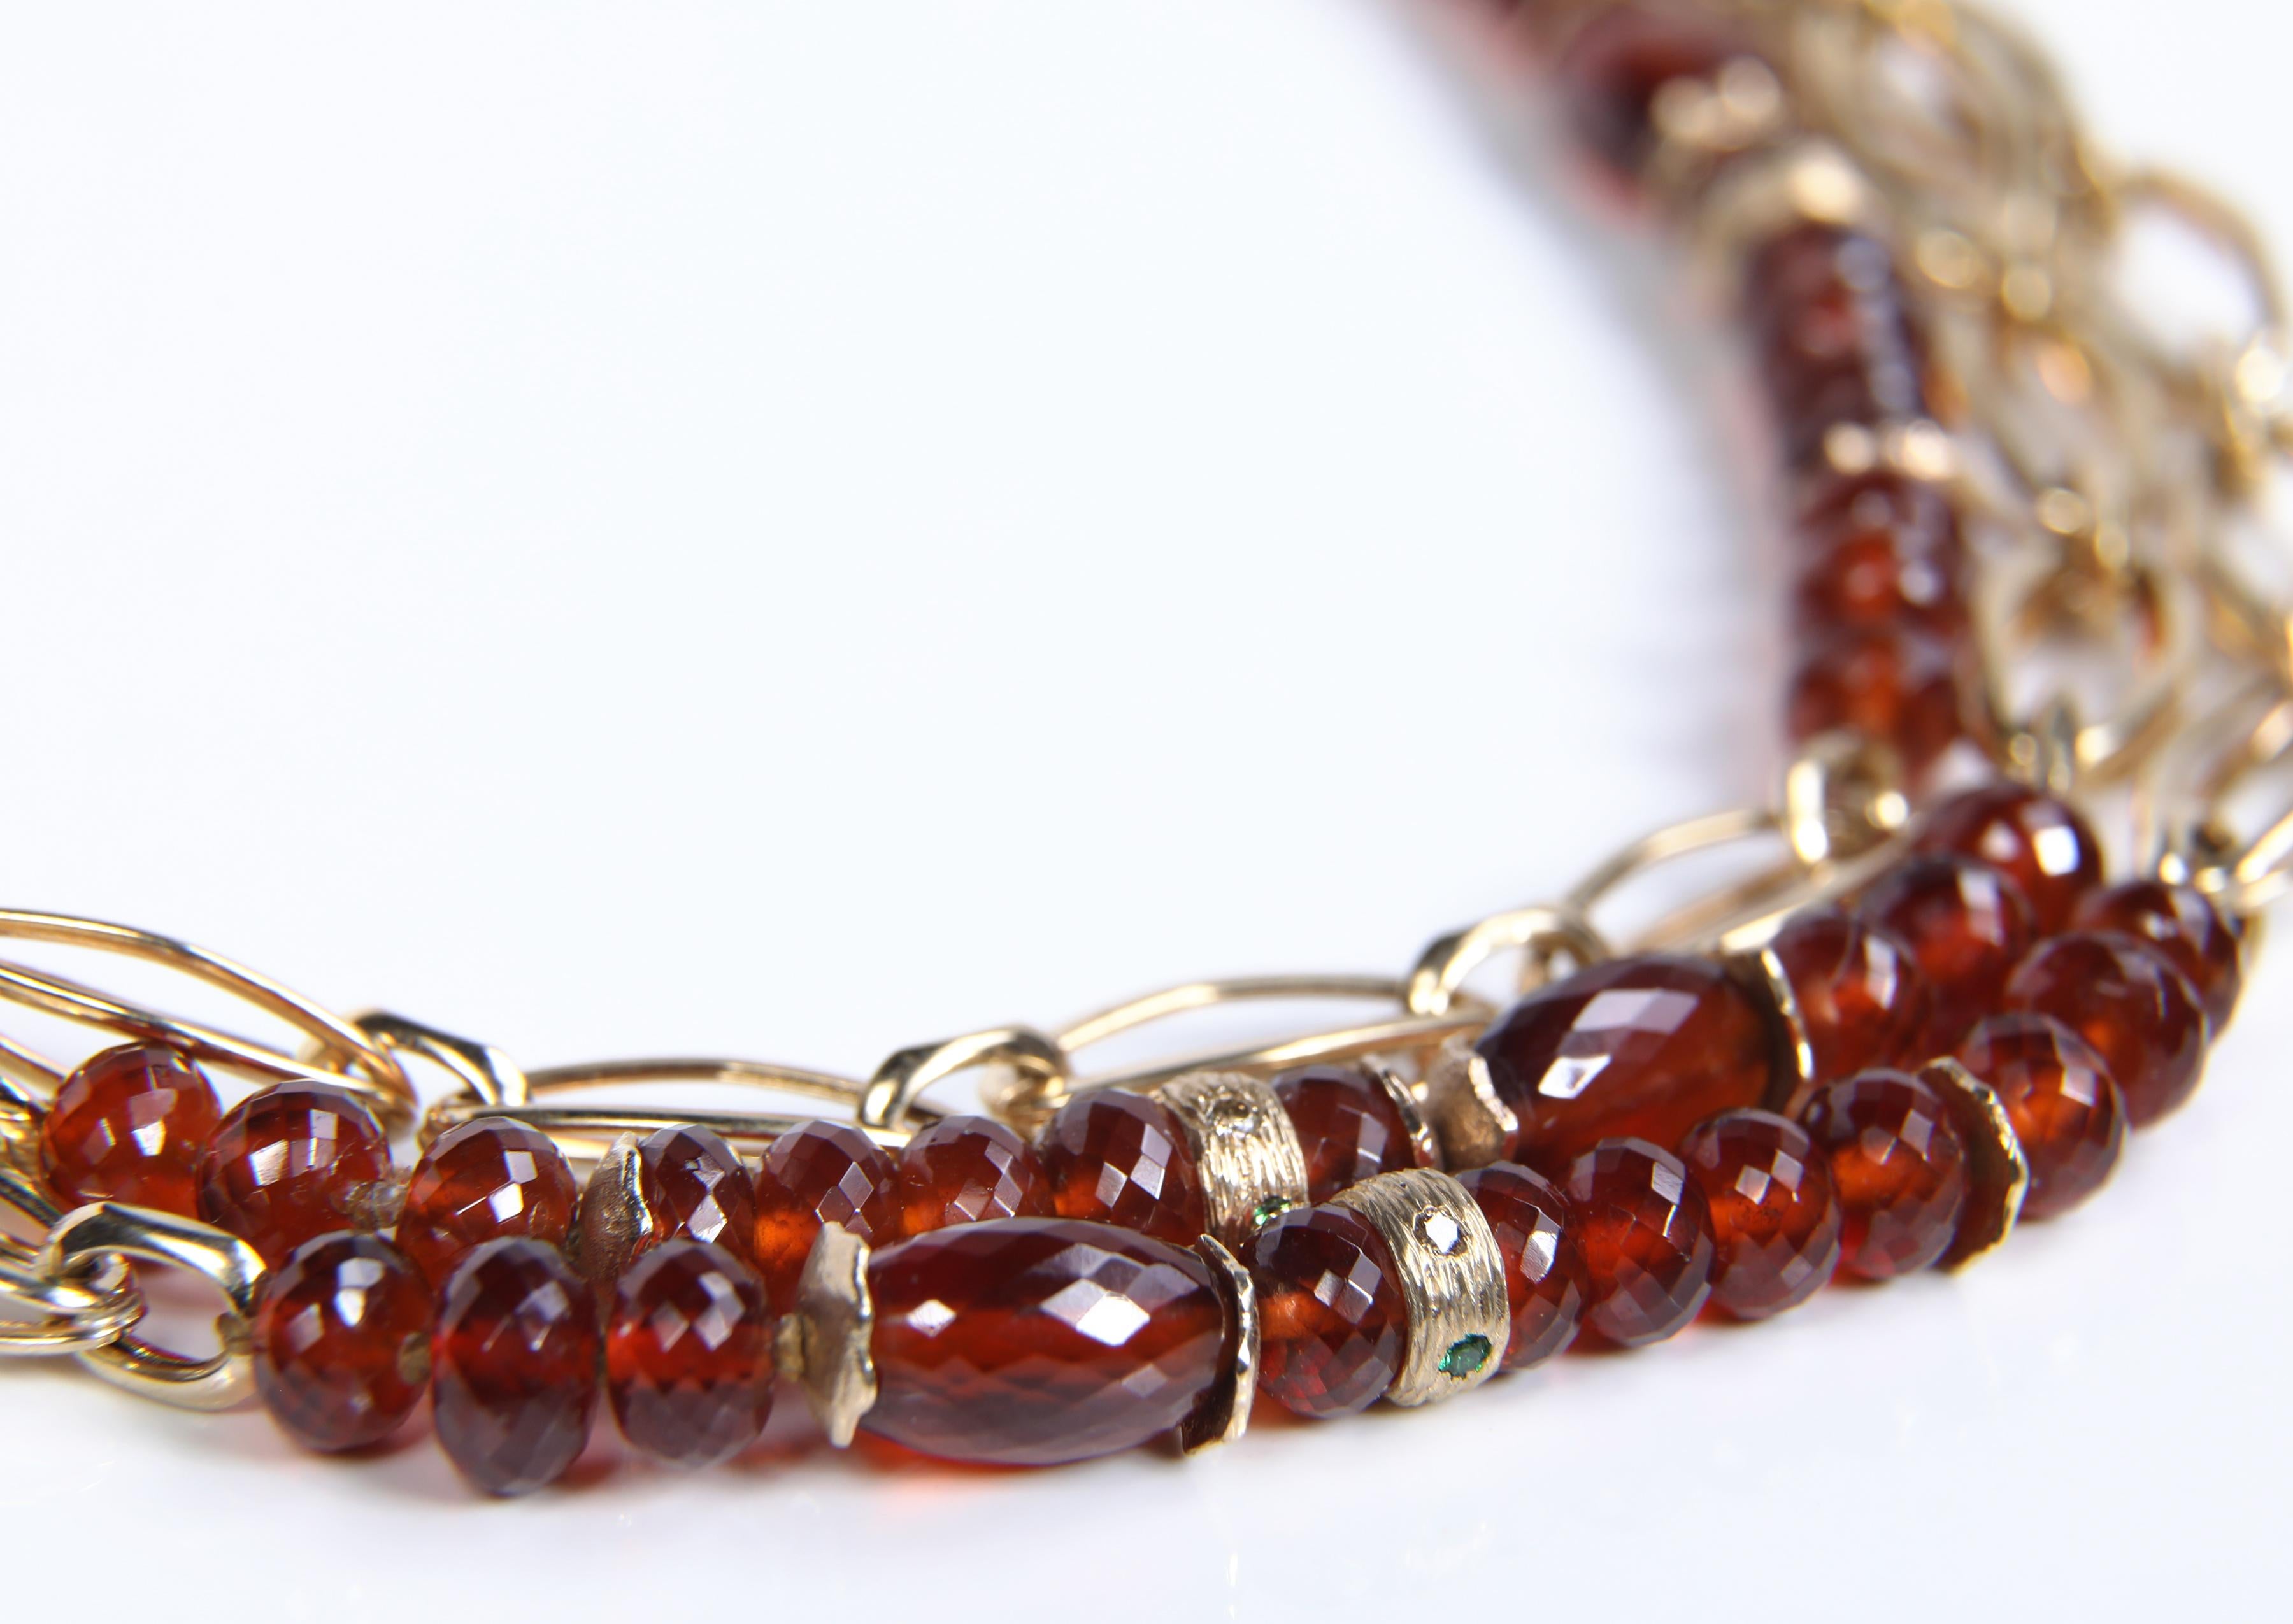 Creating a necklace with spessartite and tsavorite garnet, Champagne diamonds, and gold captures the essence of 